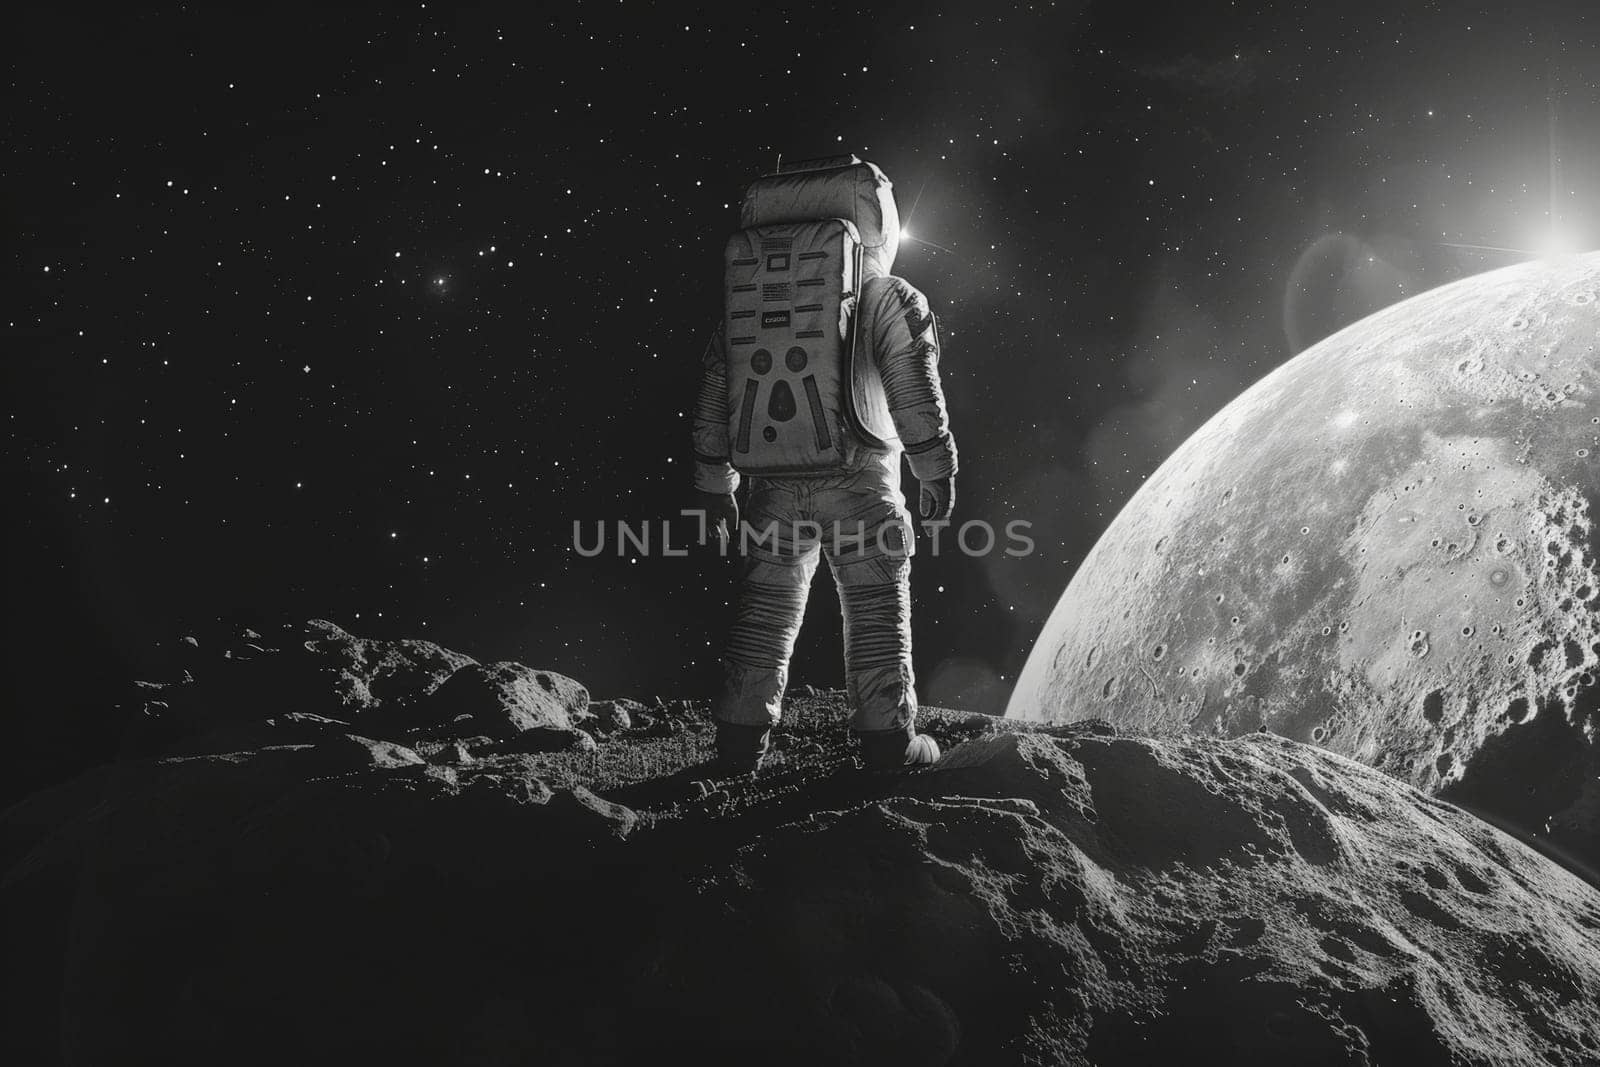 A man in a spacesuit stands on a rocky surface looking up at a large planet by nateemee